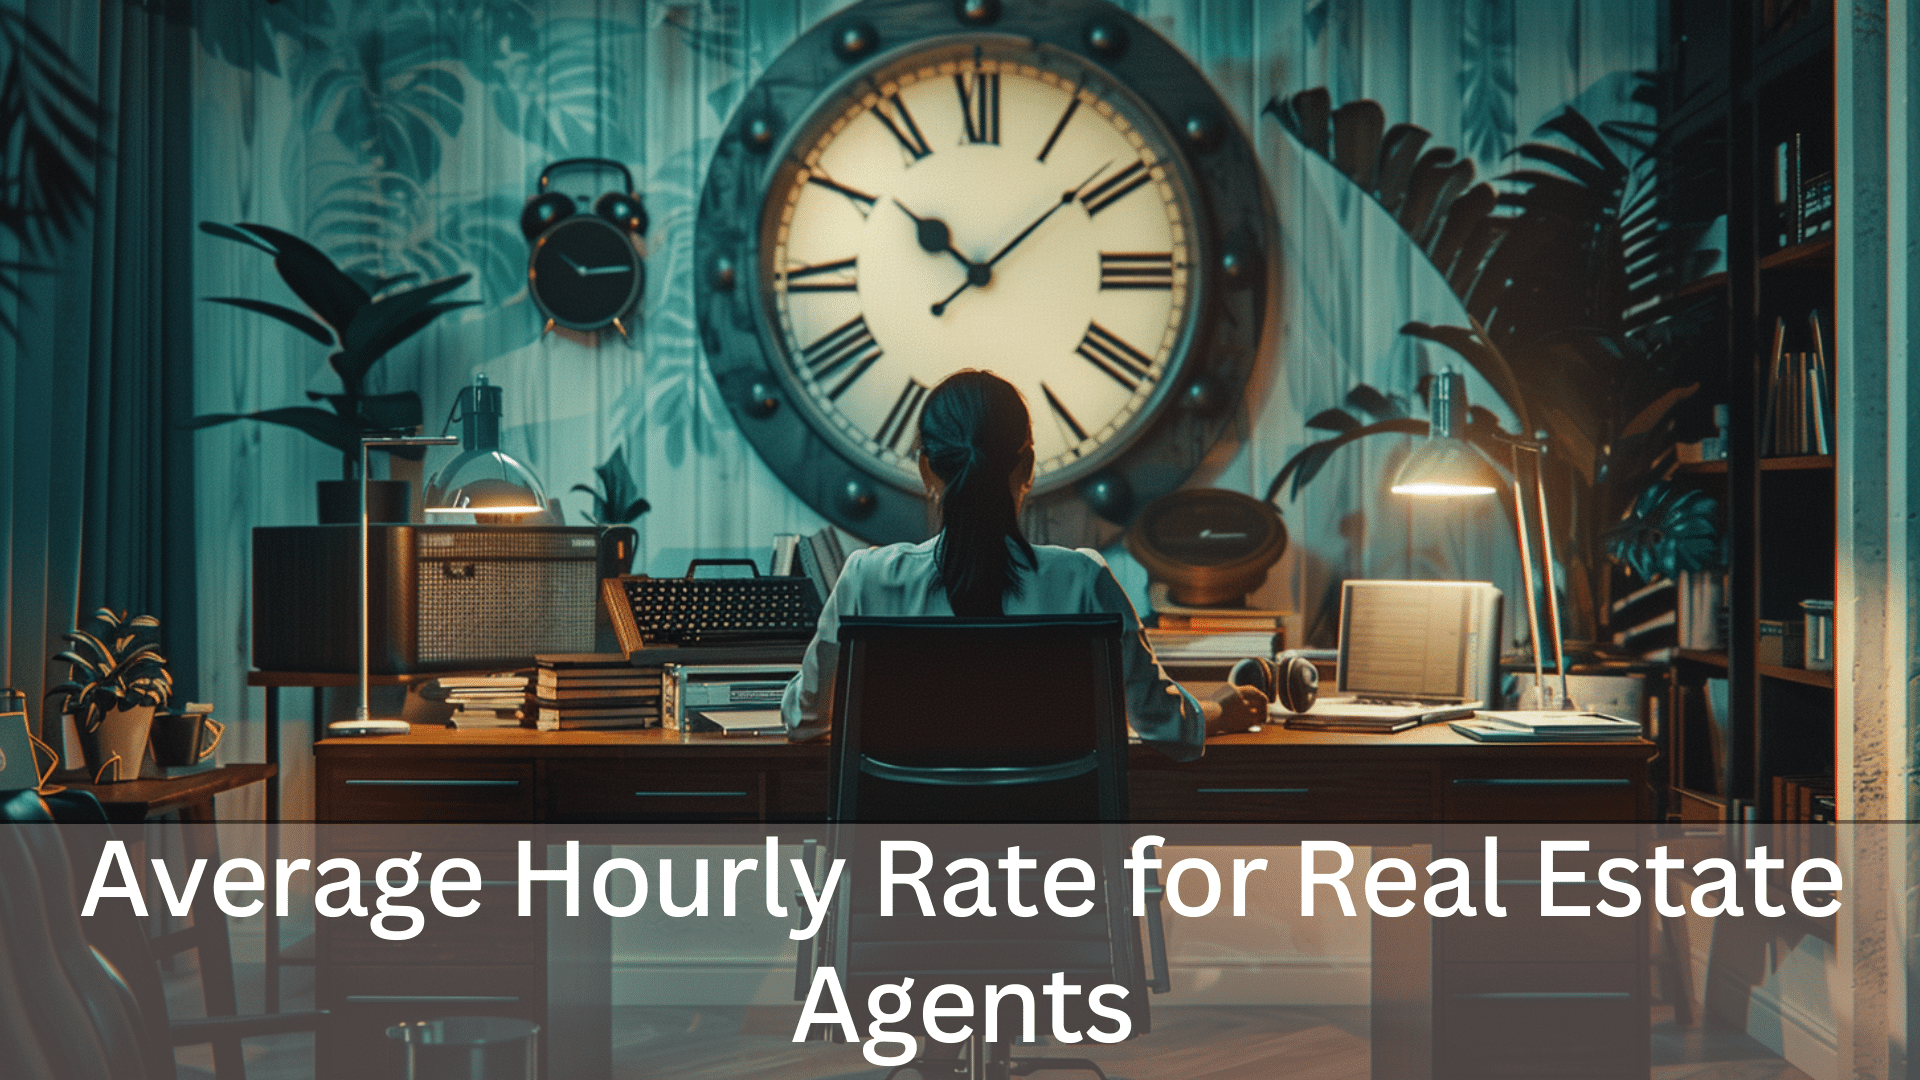 Average hourly rate for real estate agents